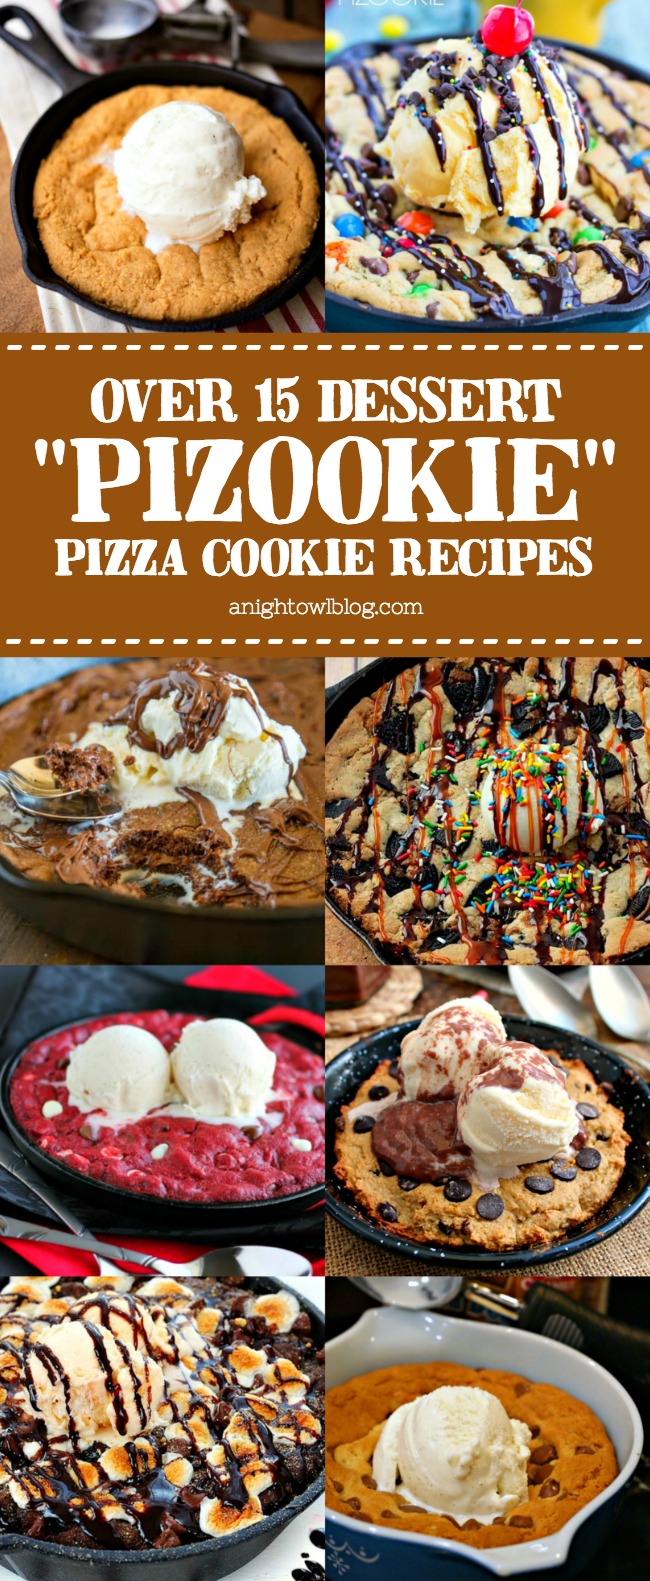 The perfect dessert for two, try one of these delicious "Pizookie" Pizza Cookie recipes!